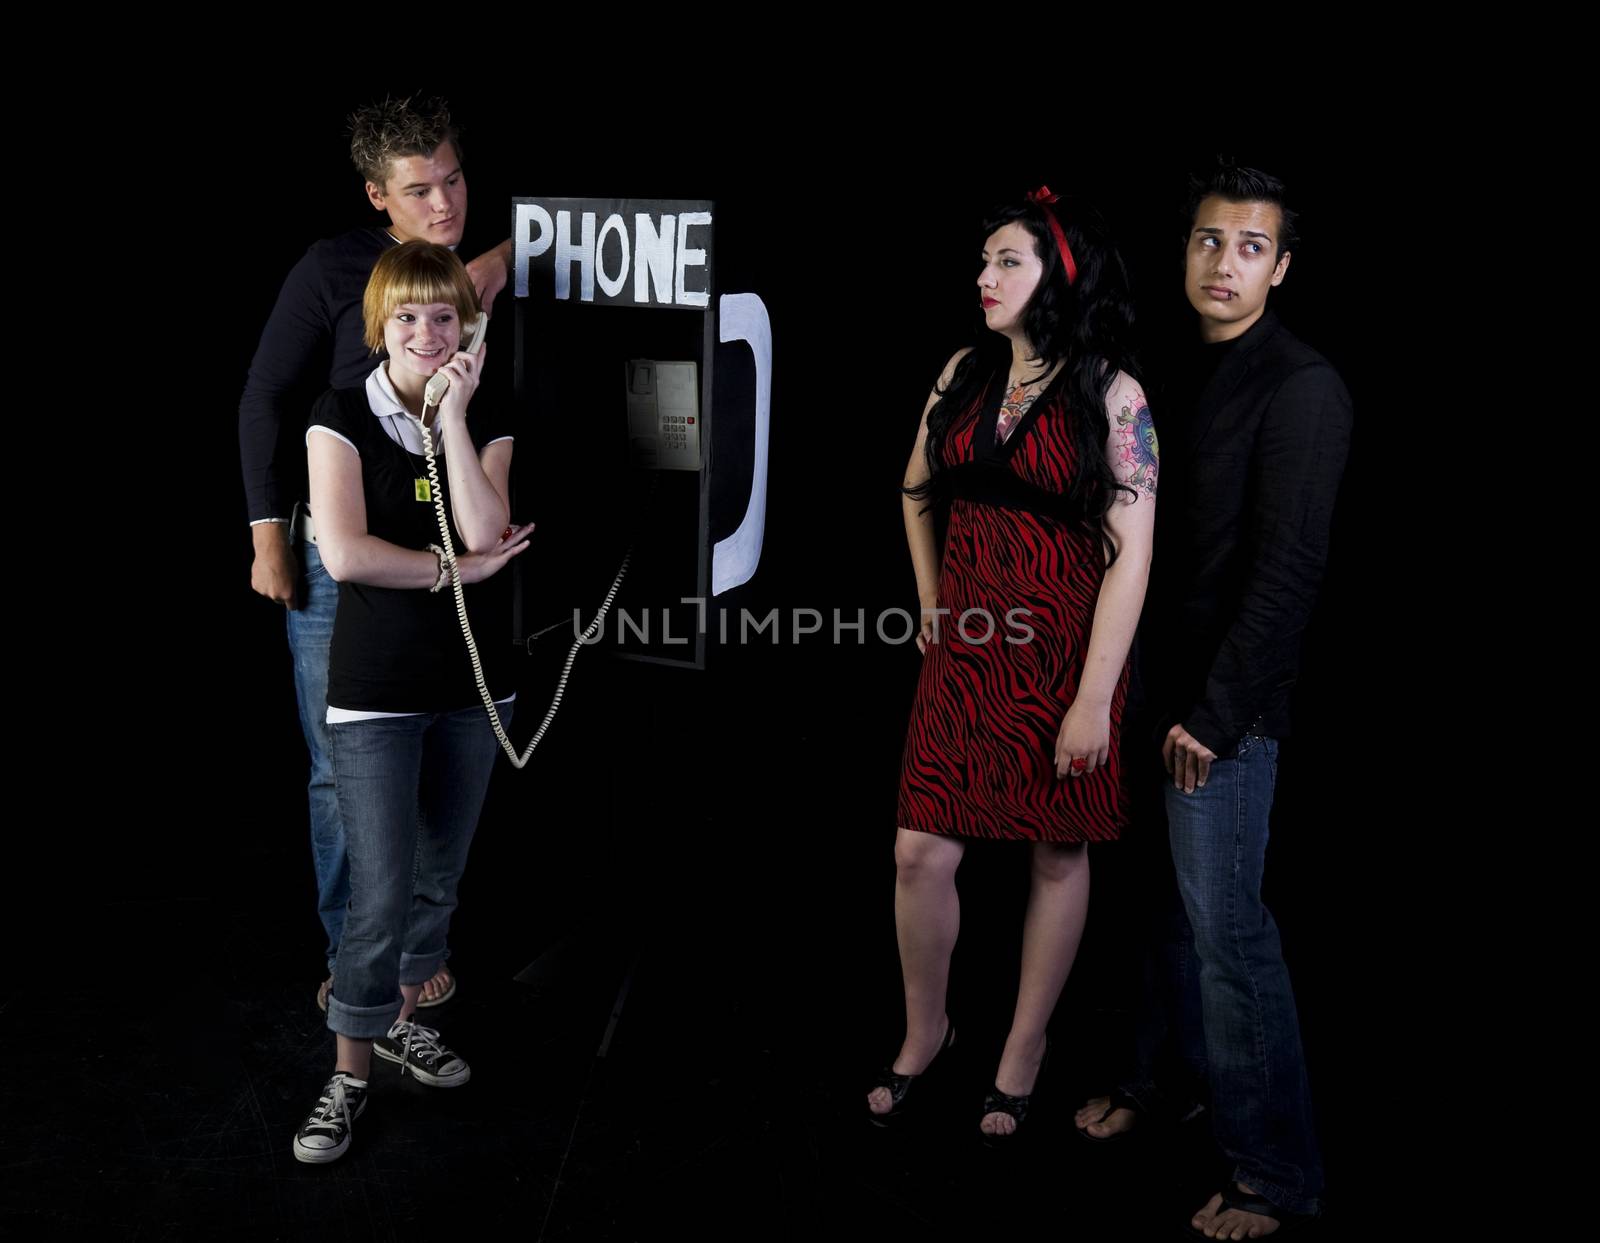 Four teenagers in a high school play.  A girl & her boyfrind wait for their turn to use a public phone while another girl chats away.